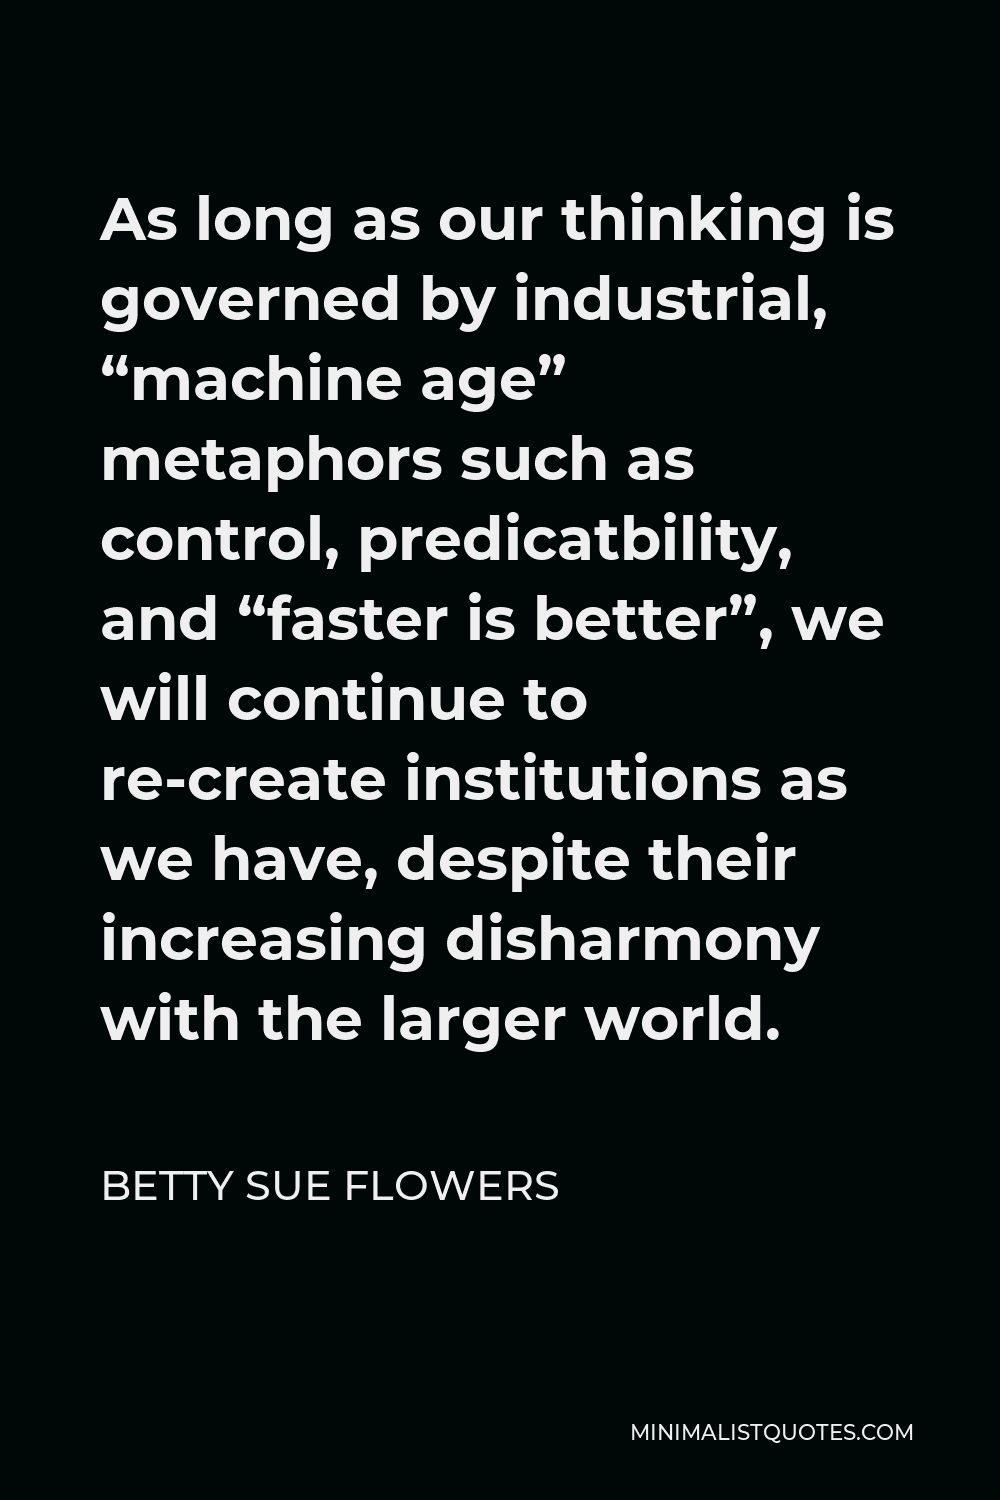 Betty Sue Flowers Quote - As long as our thinking is governed by industrial, “machine age” metaphors such as control, predicatbility, and “faster is better”, we will continue to re-create institutions as we have, despite their increasing disharmony with the larger world.